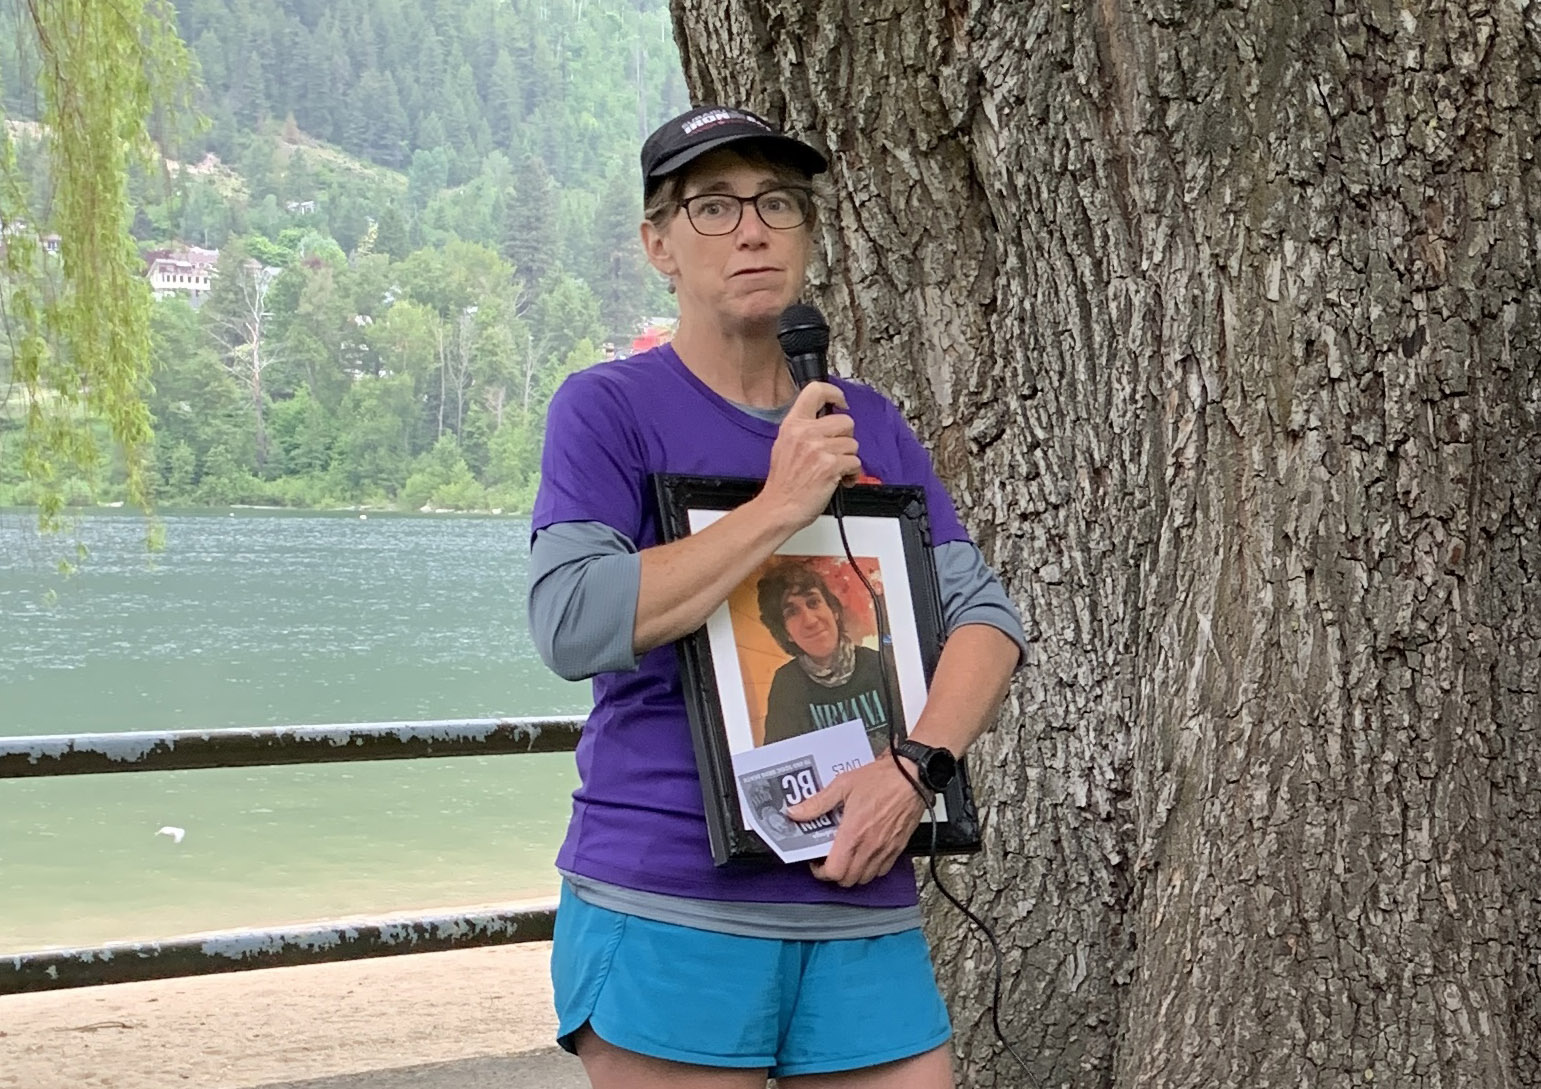 B.C. Mother Launches Marathon Across B.C. to Raise Awareness about Toxic Drug Deaths, Increase Access to a Safe Supply of Drugs